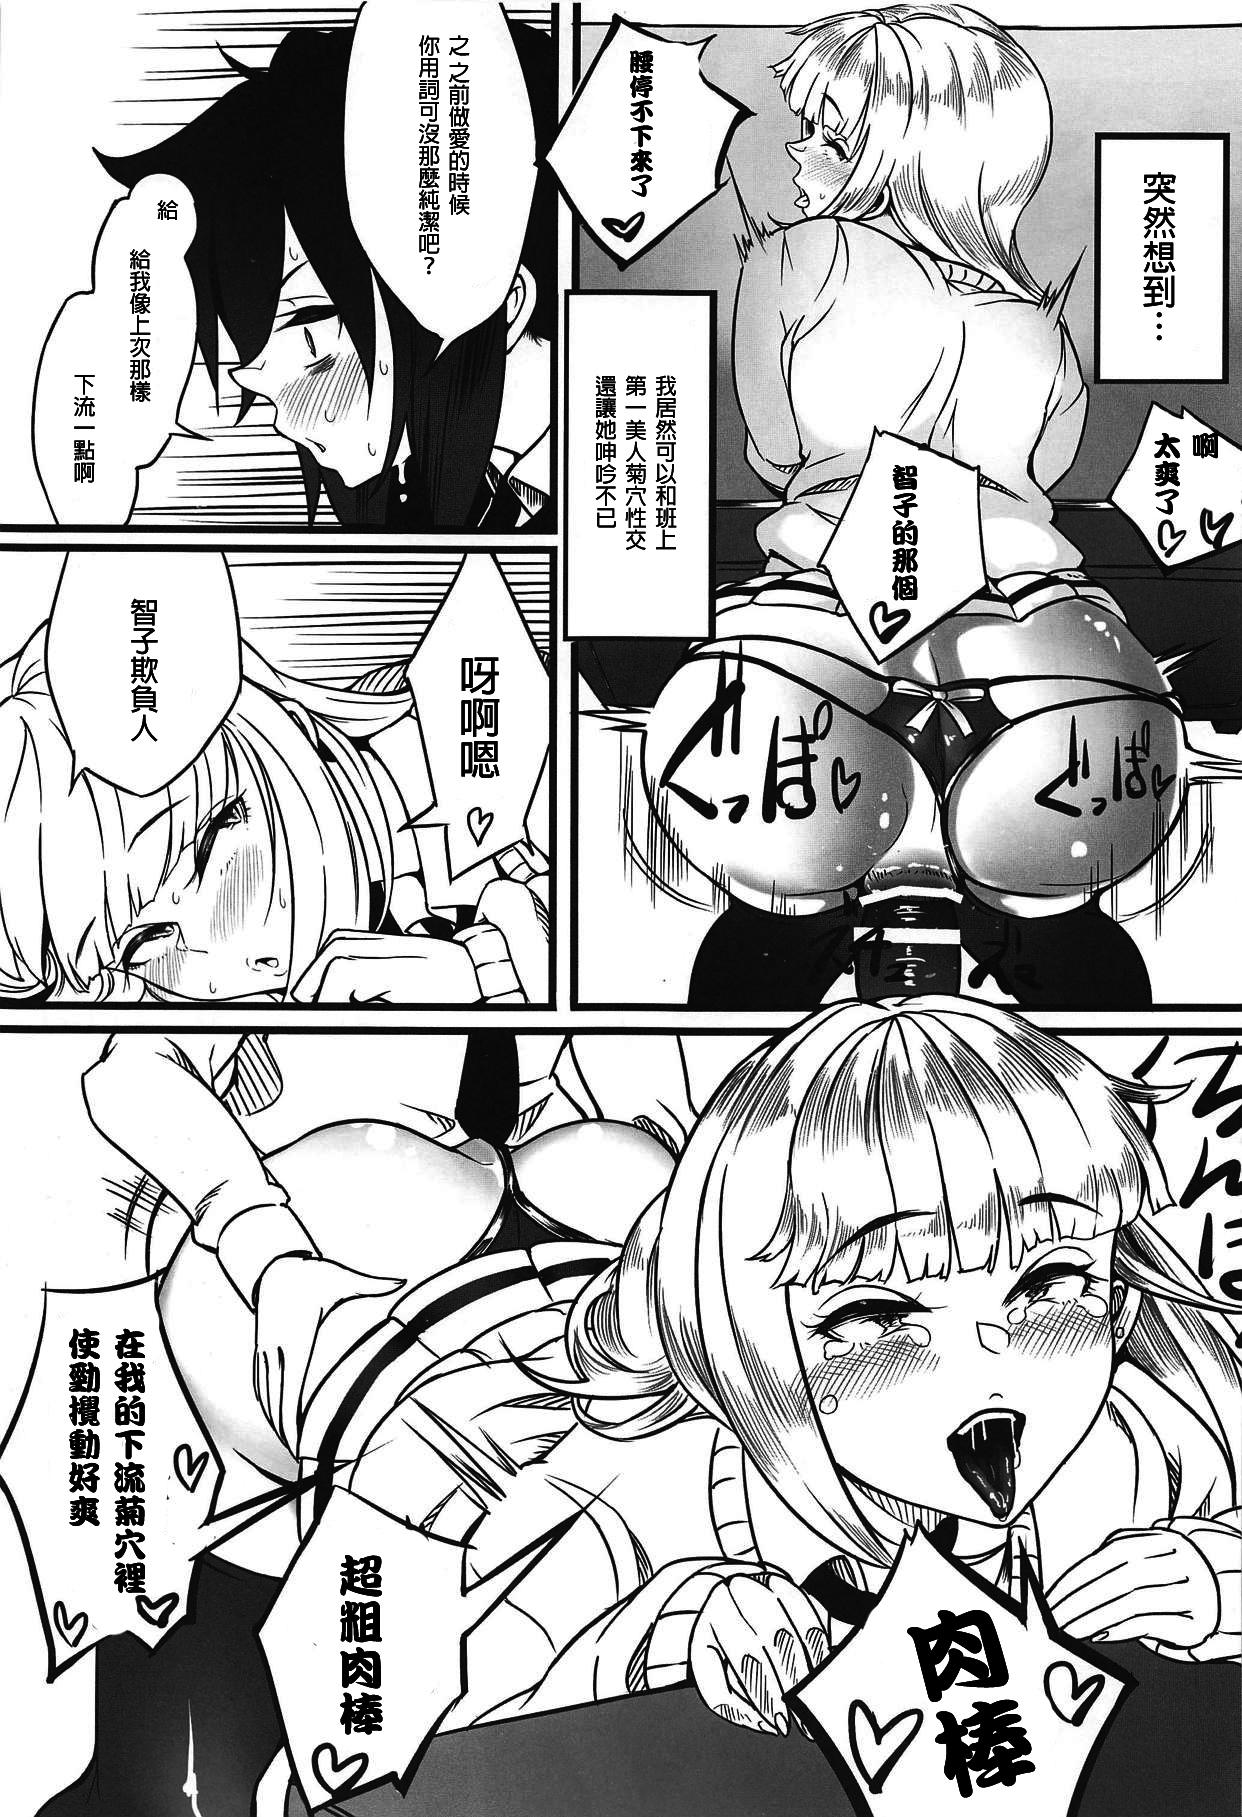 Best Blowjob Ever Yuri-chan to Asobo 丨也和百合一起玩嘛 - Its not my fault that im not popular Dominate - Page 9